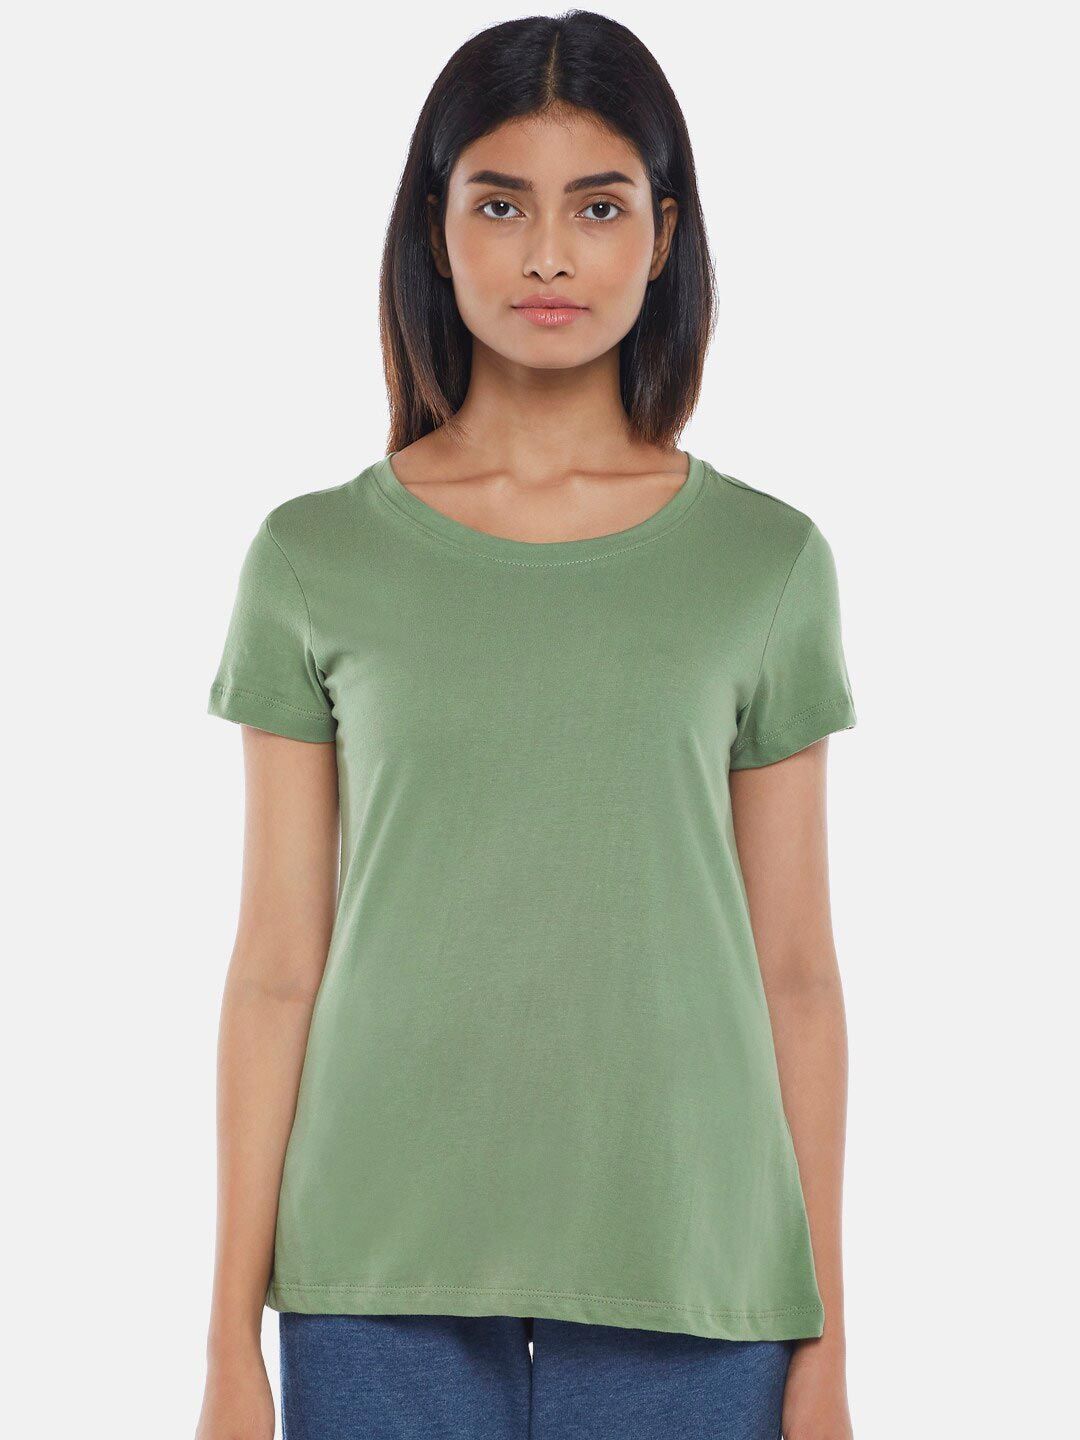 Dreamz by Pantaloons Women Olive Green Solid Pure Cotton Lounge T-shirt Price in India